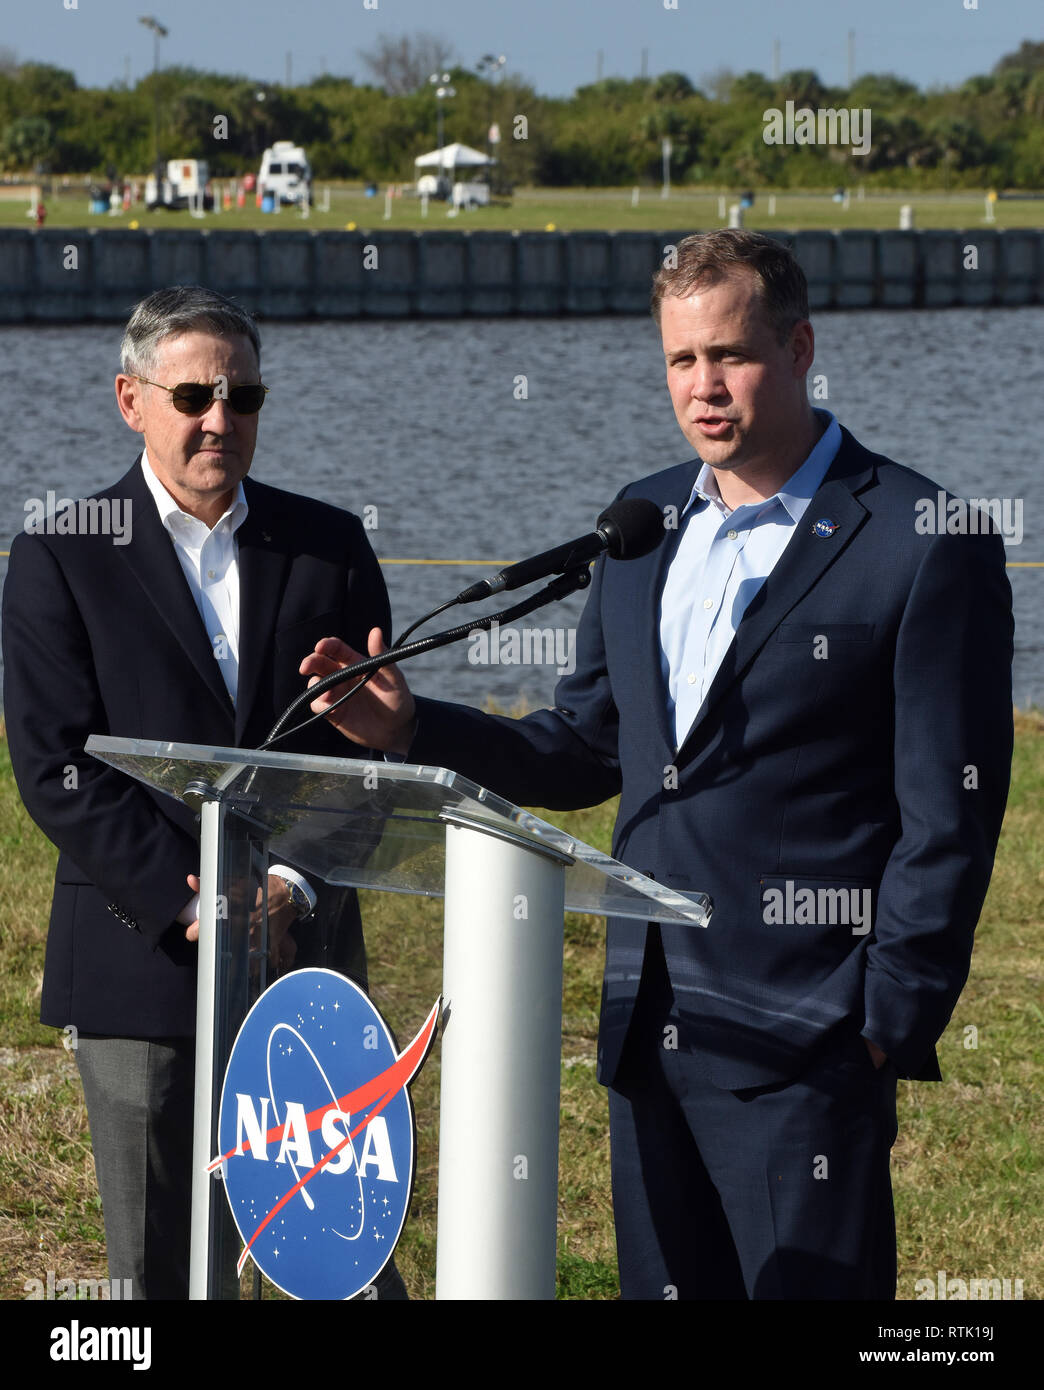 Kennedy Space Center, Florida, USA. 01st Mar, 2019. NASA Administrator Jim Bridenstine (R) speaks to the media at a press conference on March 1, 2019 as Kennedy Space Center Director Bob Cabana looks on prior to the launch of a SpaceX Falcon 9 rocket carrying the unmanned Crew Dragon capsule. The rocket is set to lift off from Pad 39A at the Kennedy Space Center on its first flight, Demo-1, on March 2 at 2:49 a.m.EST. Credit: Paul Hennessy/Alamy Live News Stock Photo